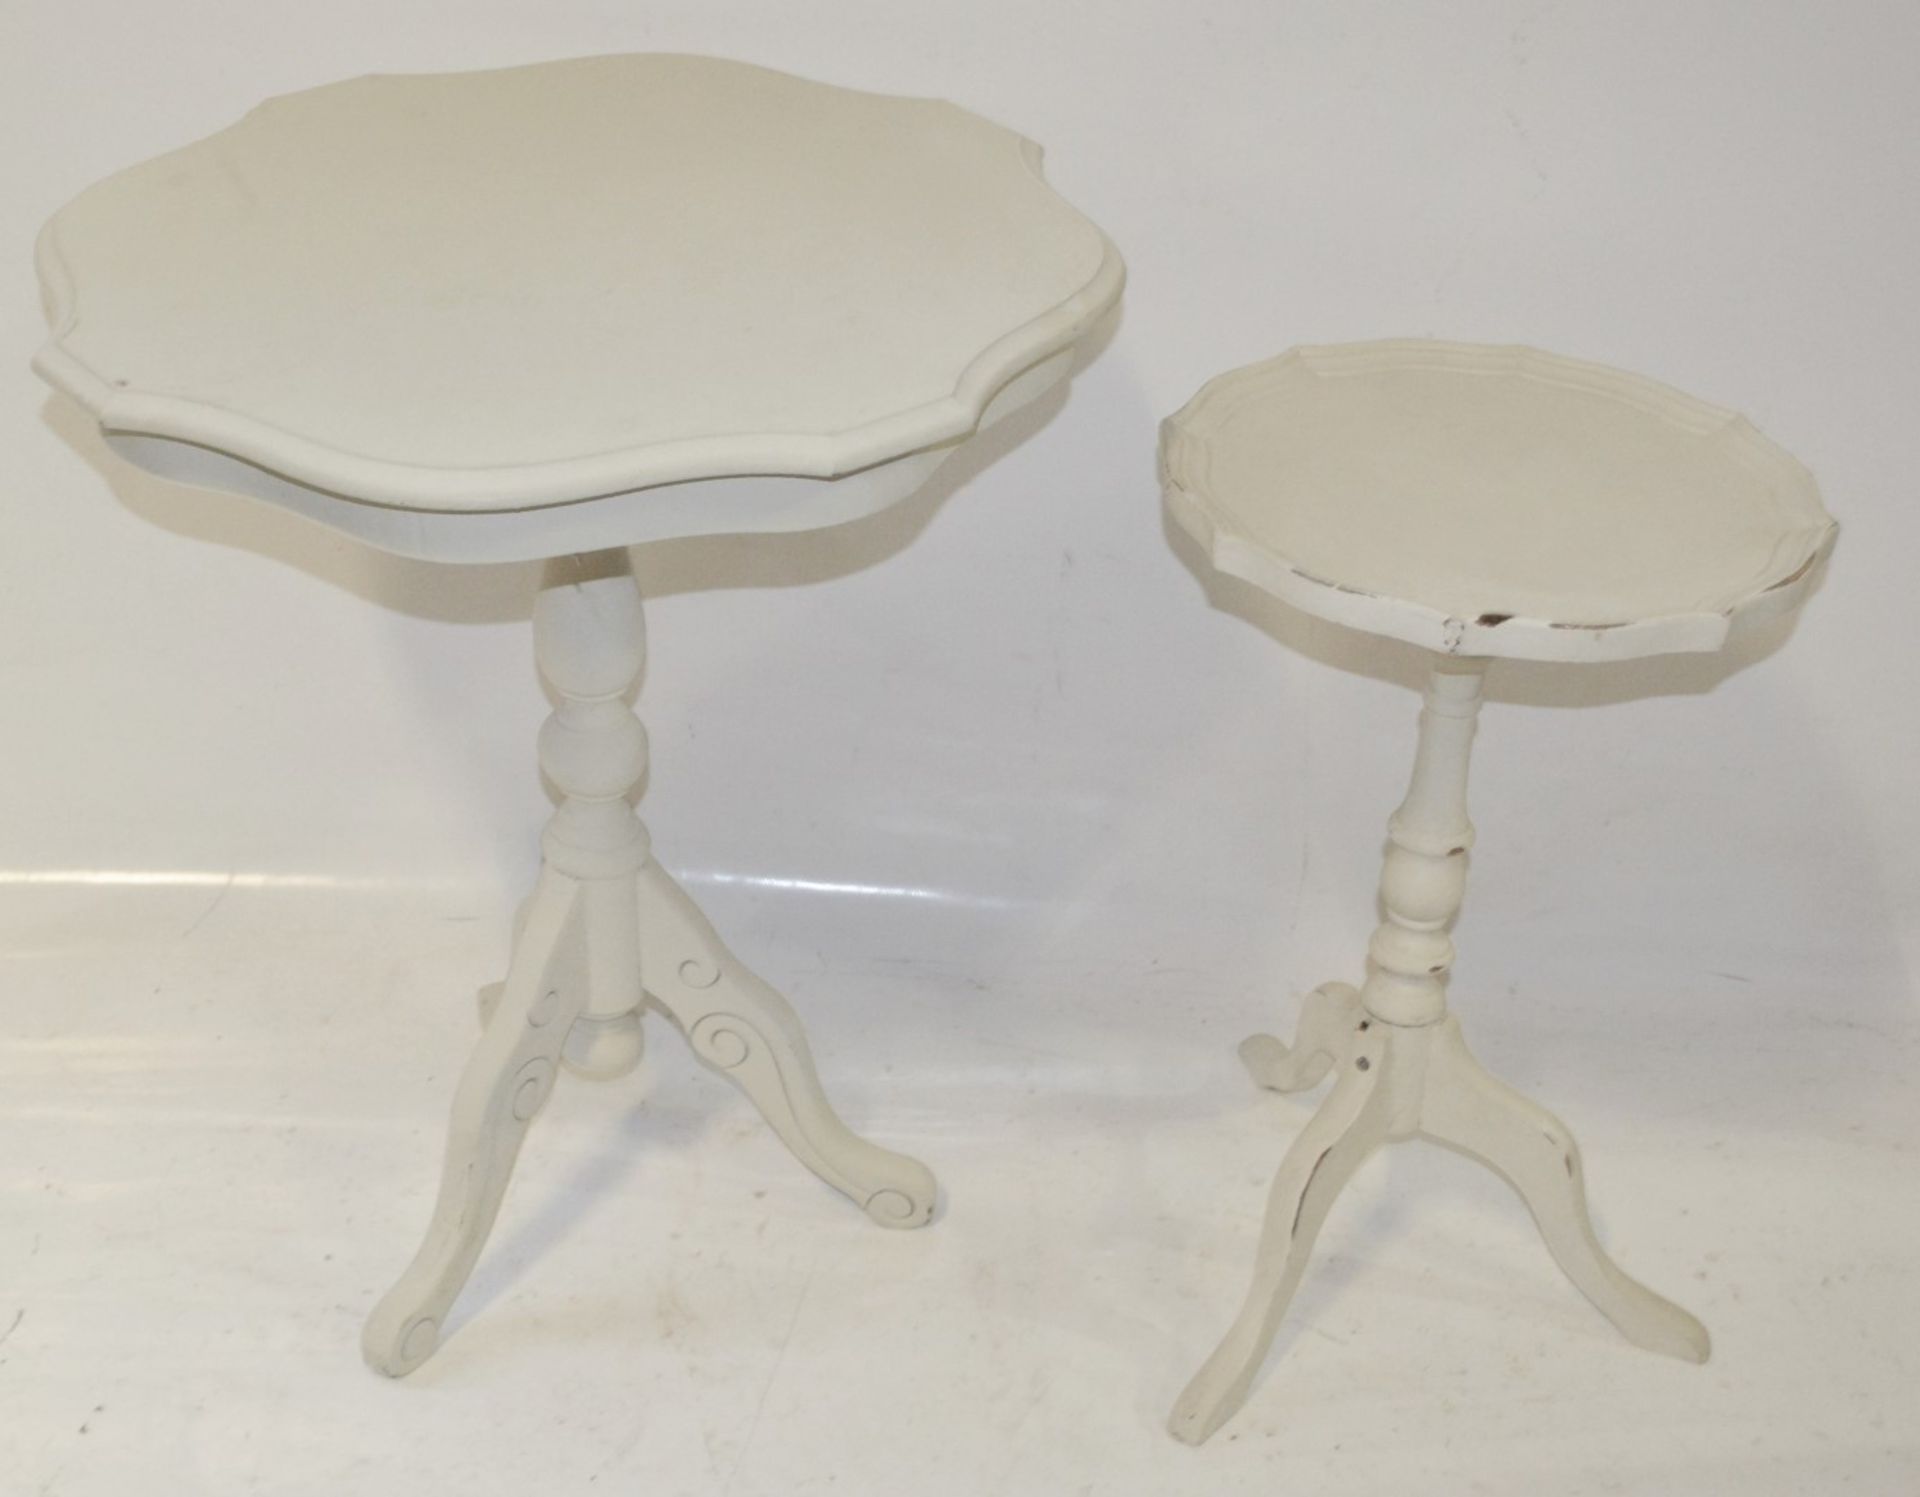 2 x Small Occasional Tables / Plant Stands - Used, In Good Overall Condition - CL327 - Location: